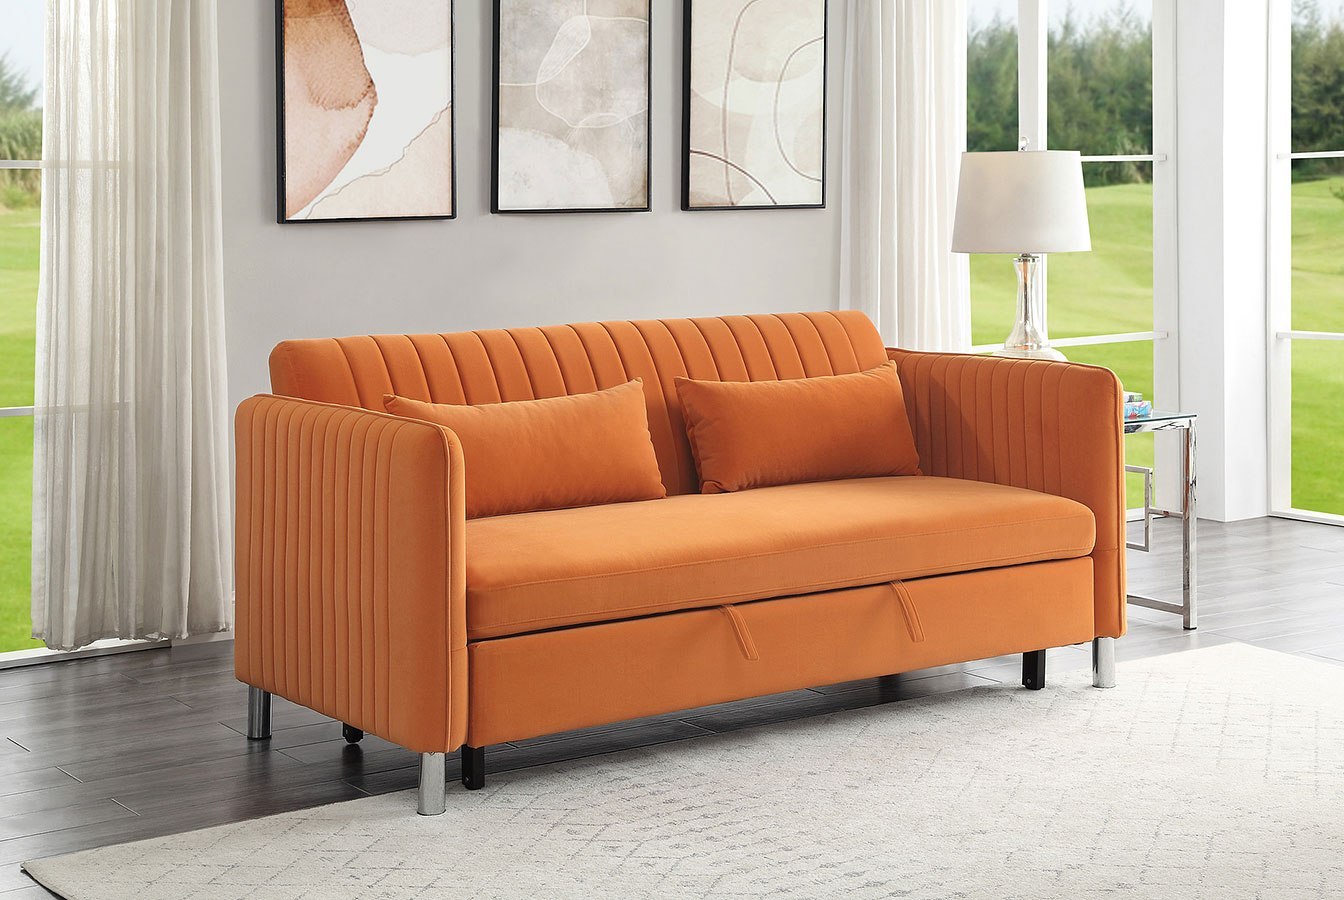 Get ★ Greenway Convertible Studio Sofa w/ Pull-out Bed (Orange) at ...